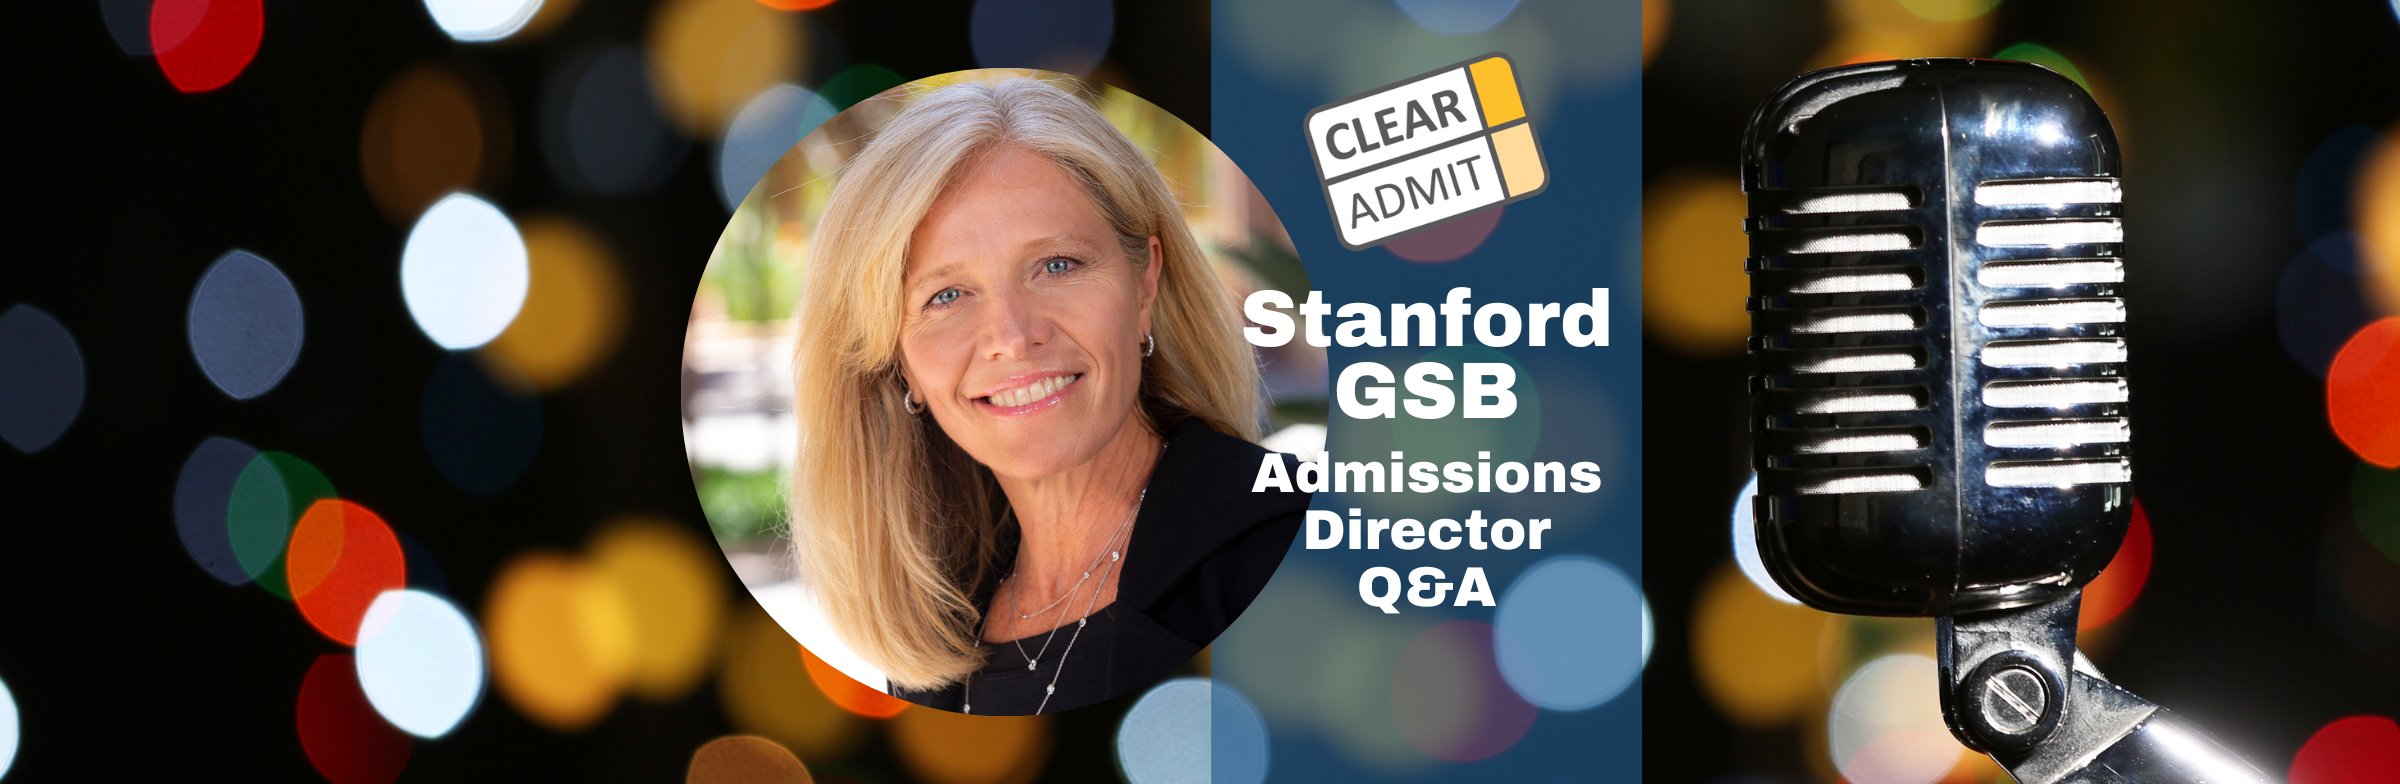 Image for Admissions Director Q&A: Kirsten Moss of Stanford GSB